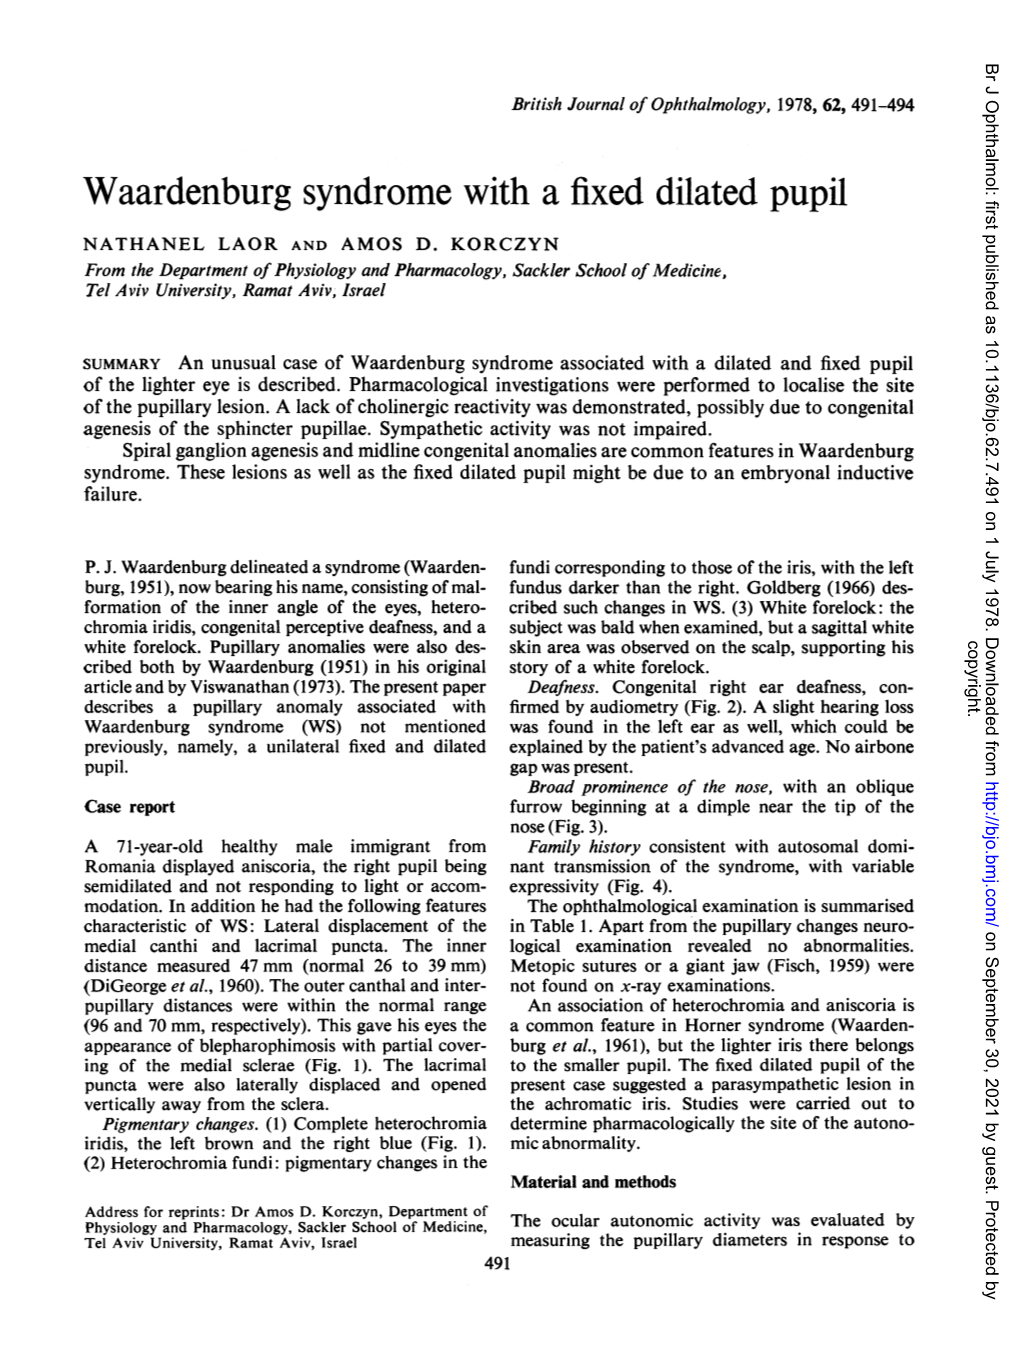 Waardenburg Syndrome with a Fixed Dilated Pupil